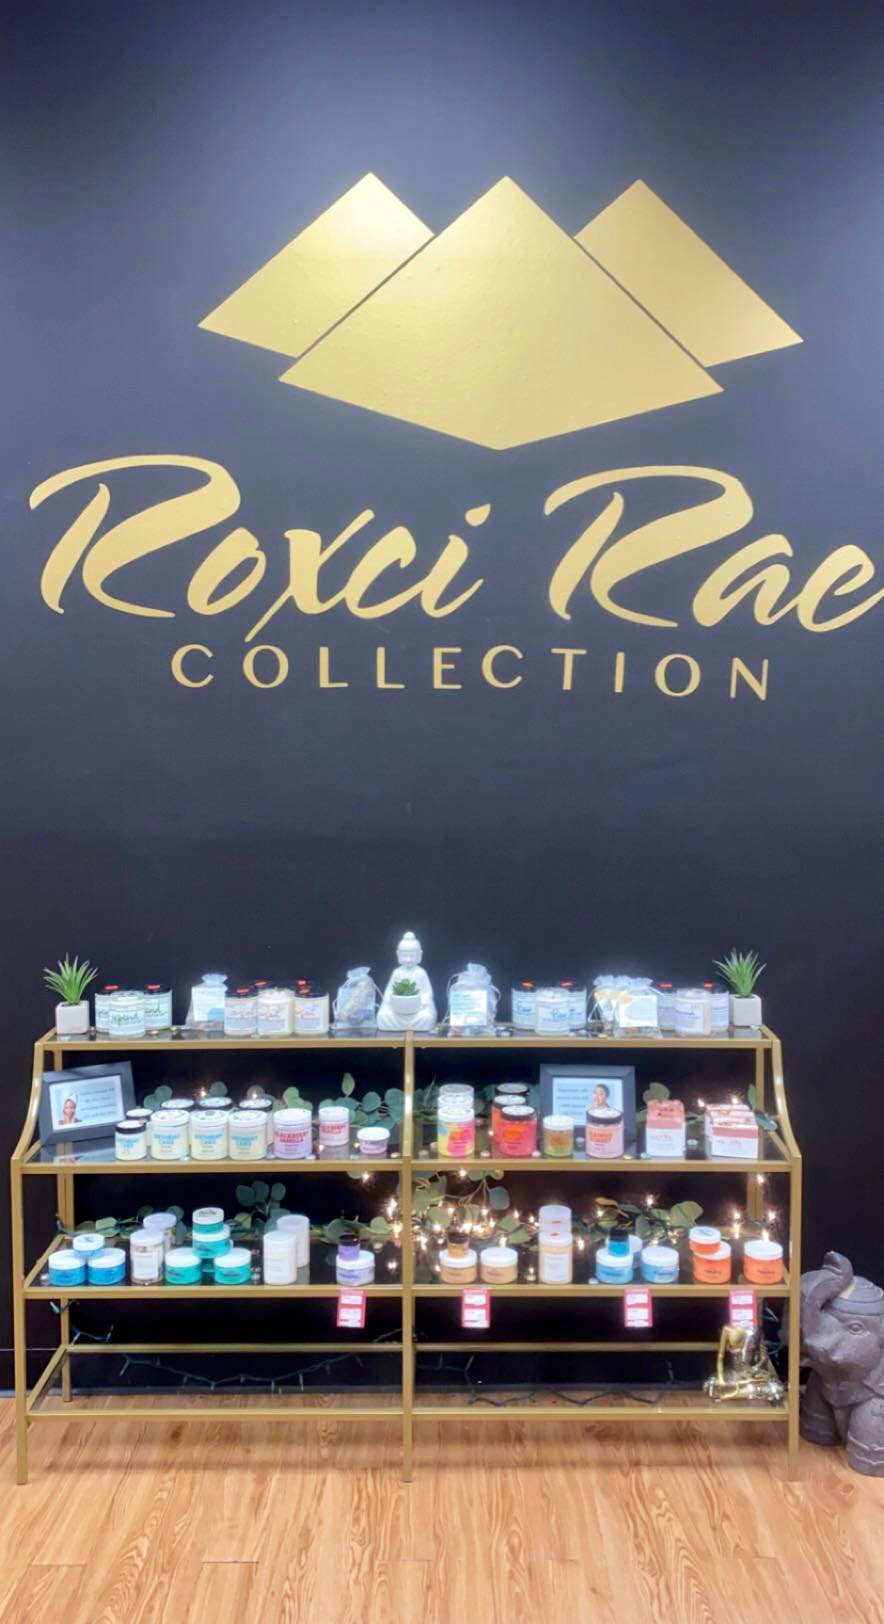 The Roxci Rae Collection [Community & Cultural Awareness]